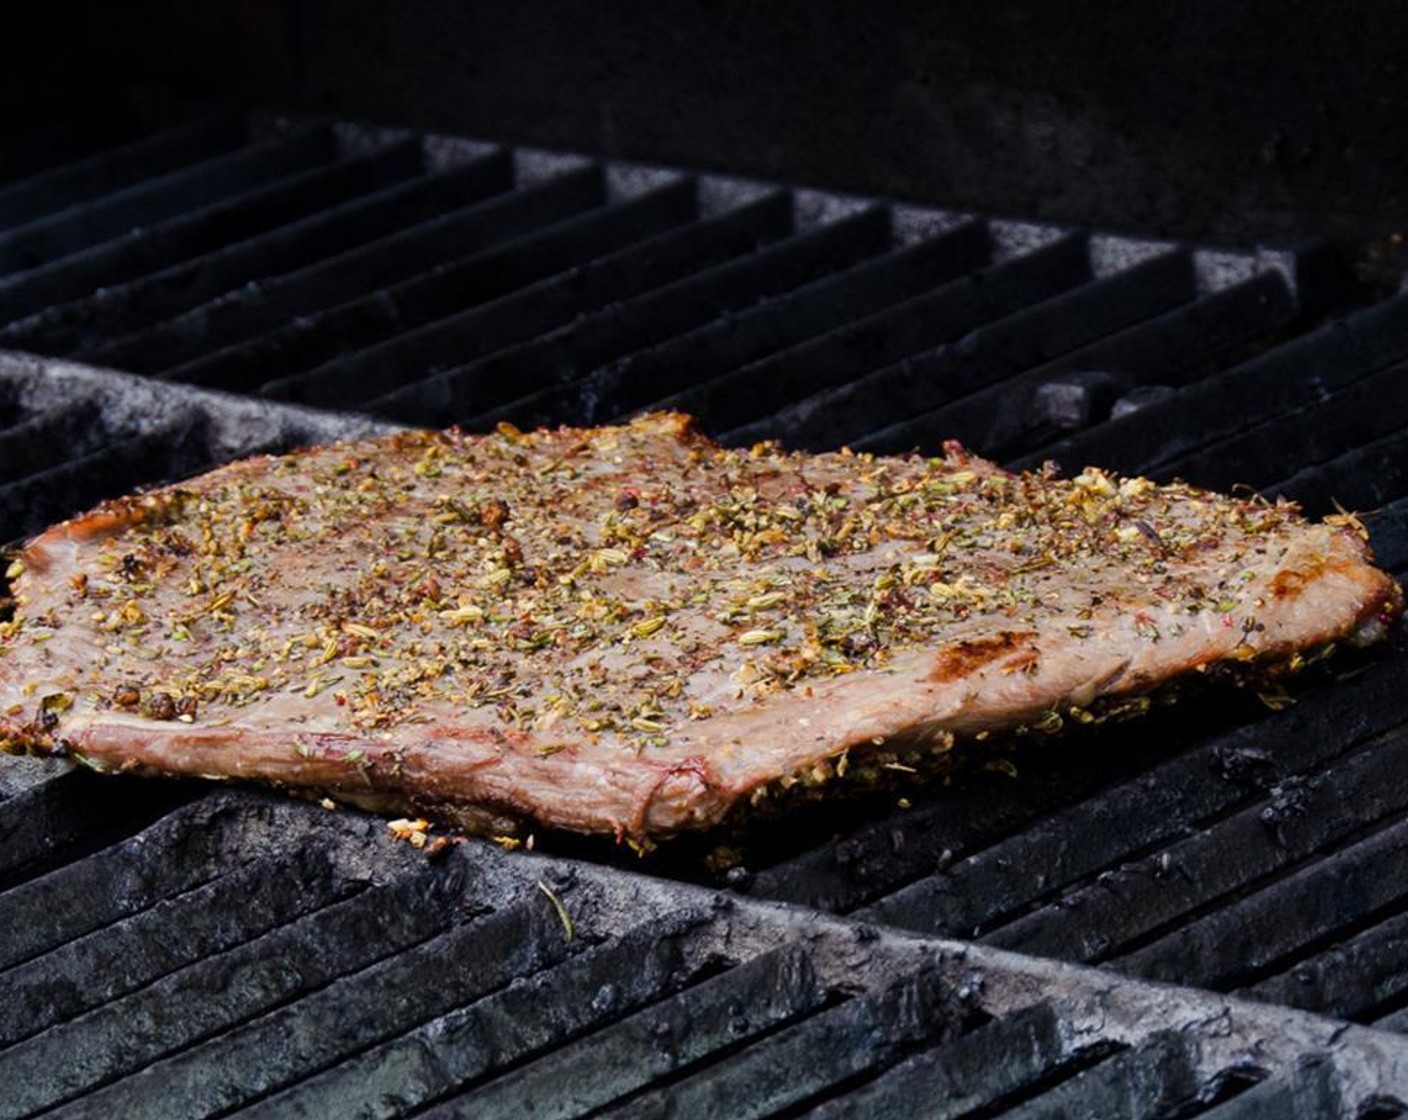 step 7 Preheat the grill to high heat (about 500 degrees F or 260 degrees C). Place the steak on the grill and turn the heat down to a medium-high heat (about 450 degrees F or 230 degrees C). Grill 5 to 6 minutes per side for a medium-rare steak.